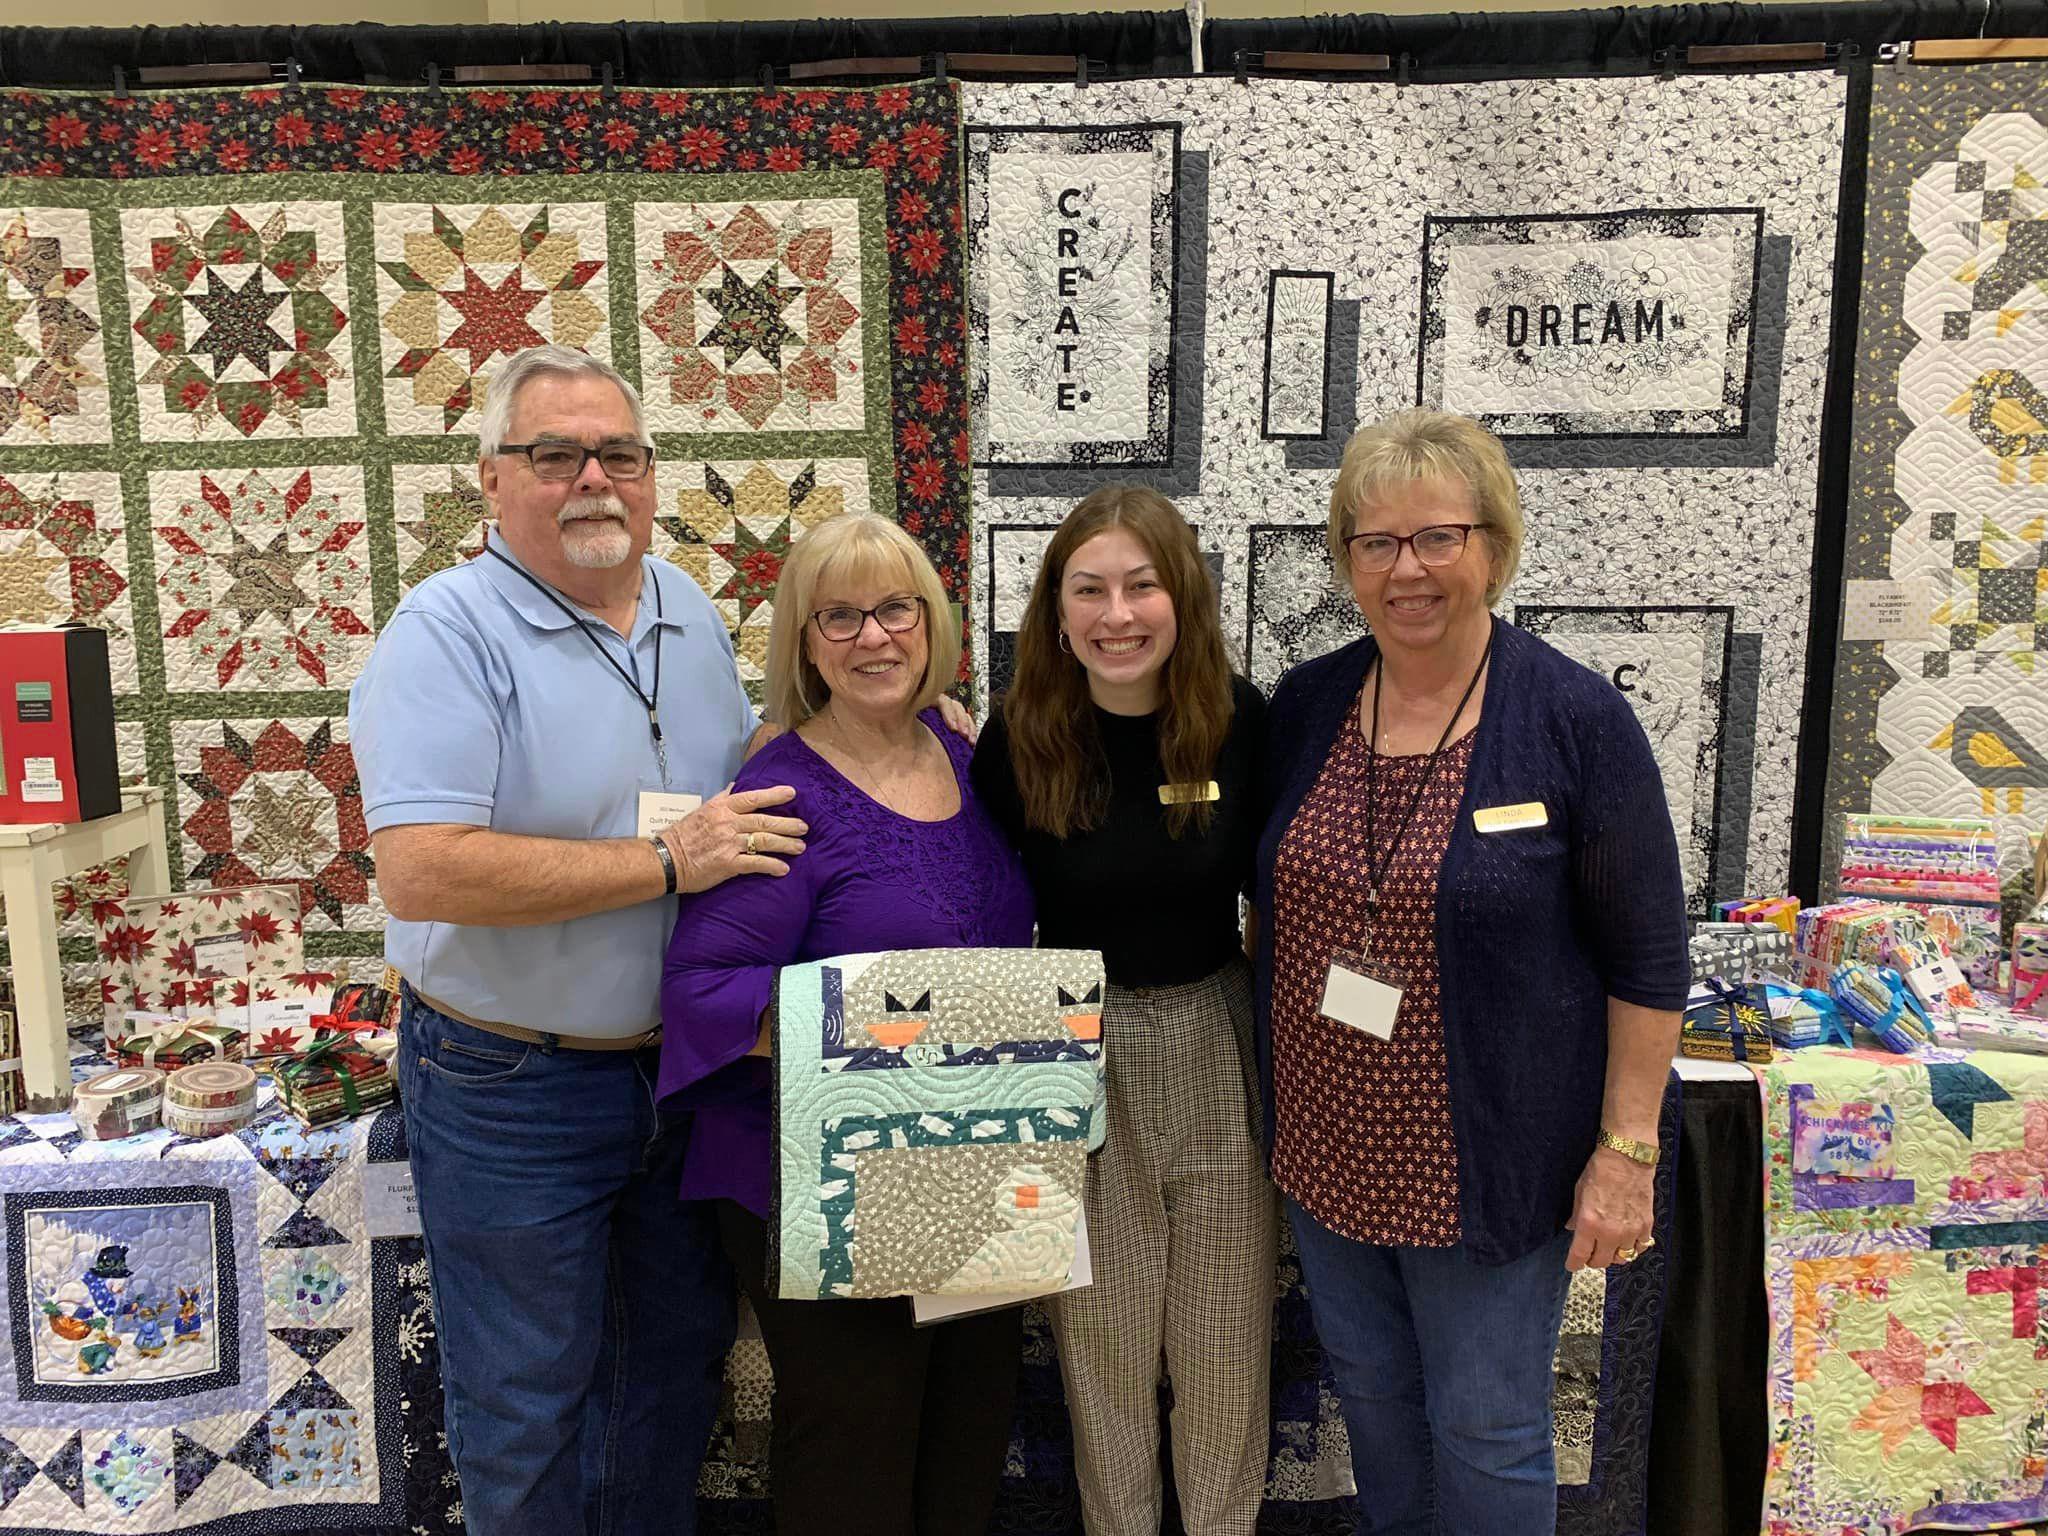 Some before & after from the quilt show last weekend! Thanks to all who stopped by.